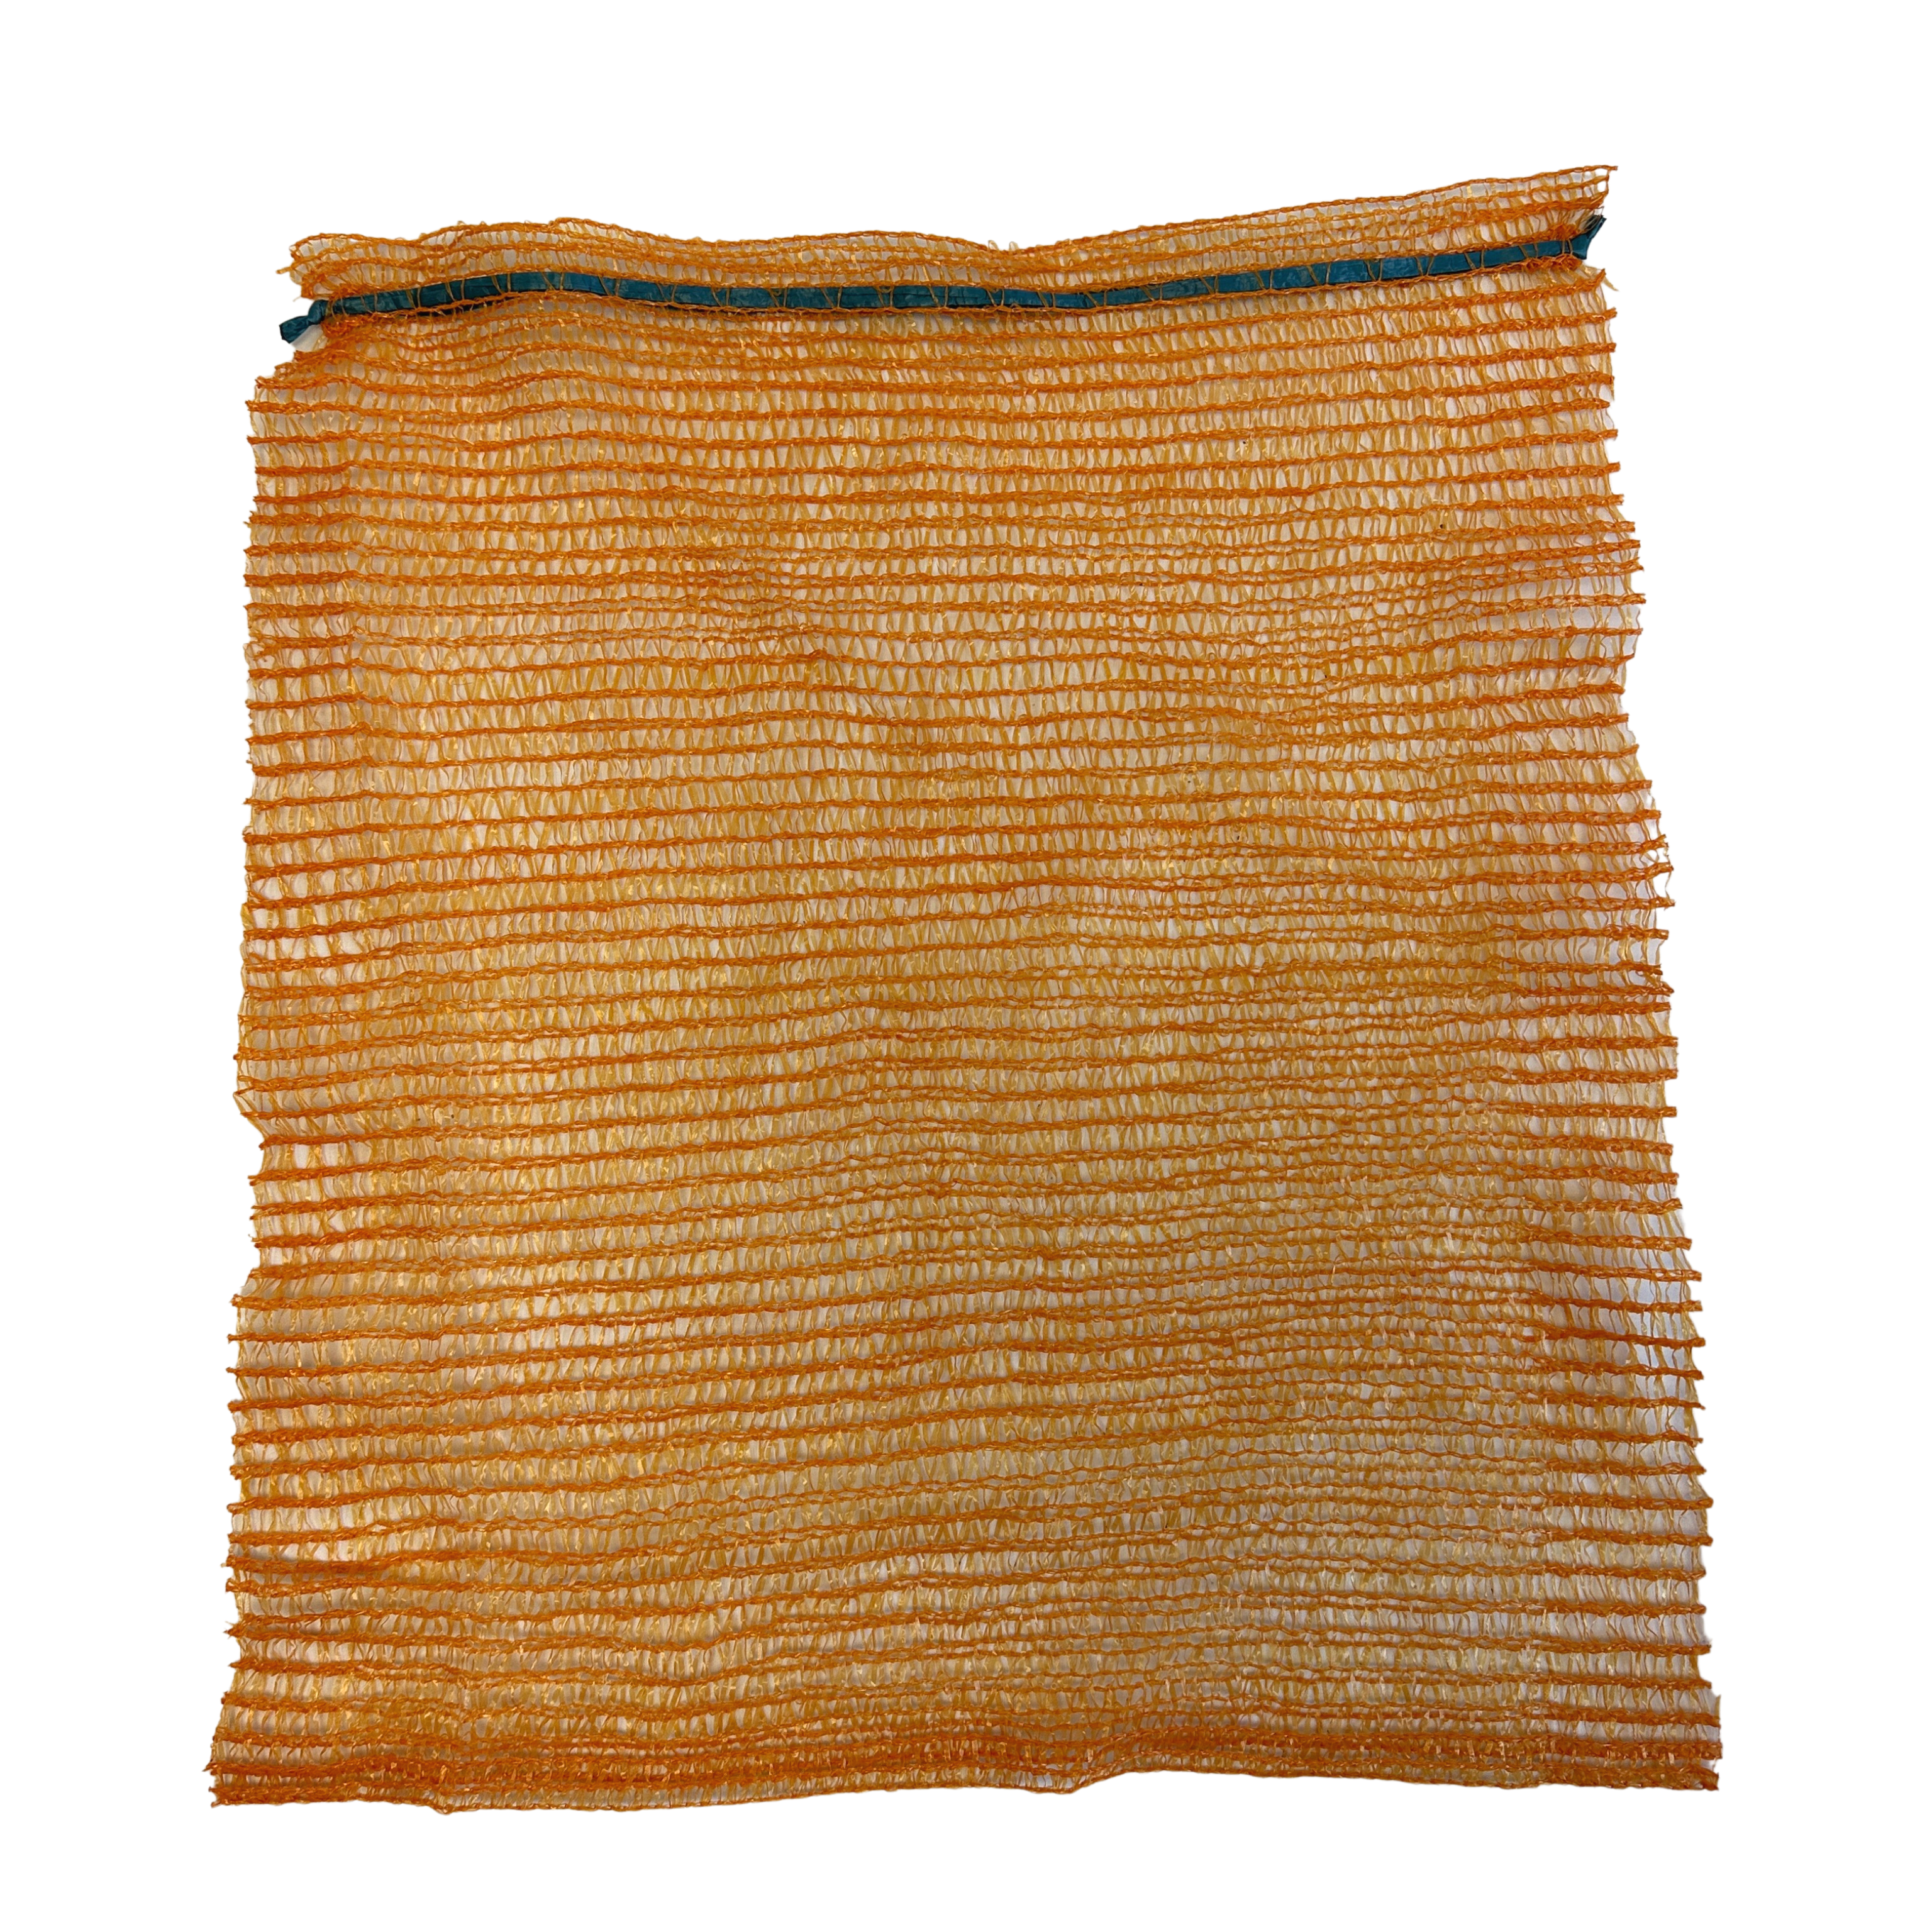 20kg 50kg pe woven mesh bag with drawstring for storing potatoes and fruit